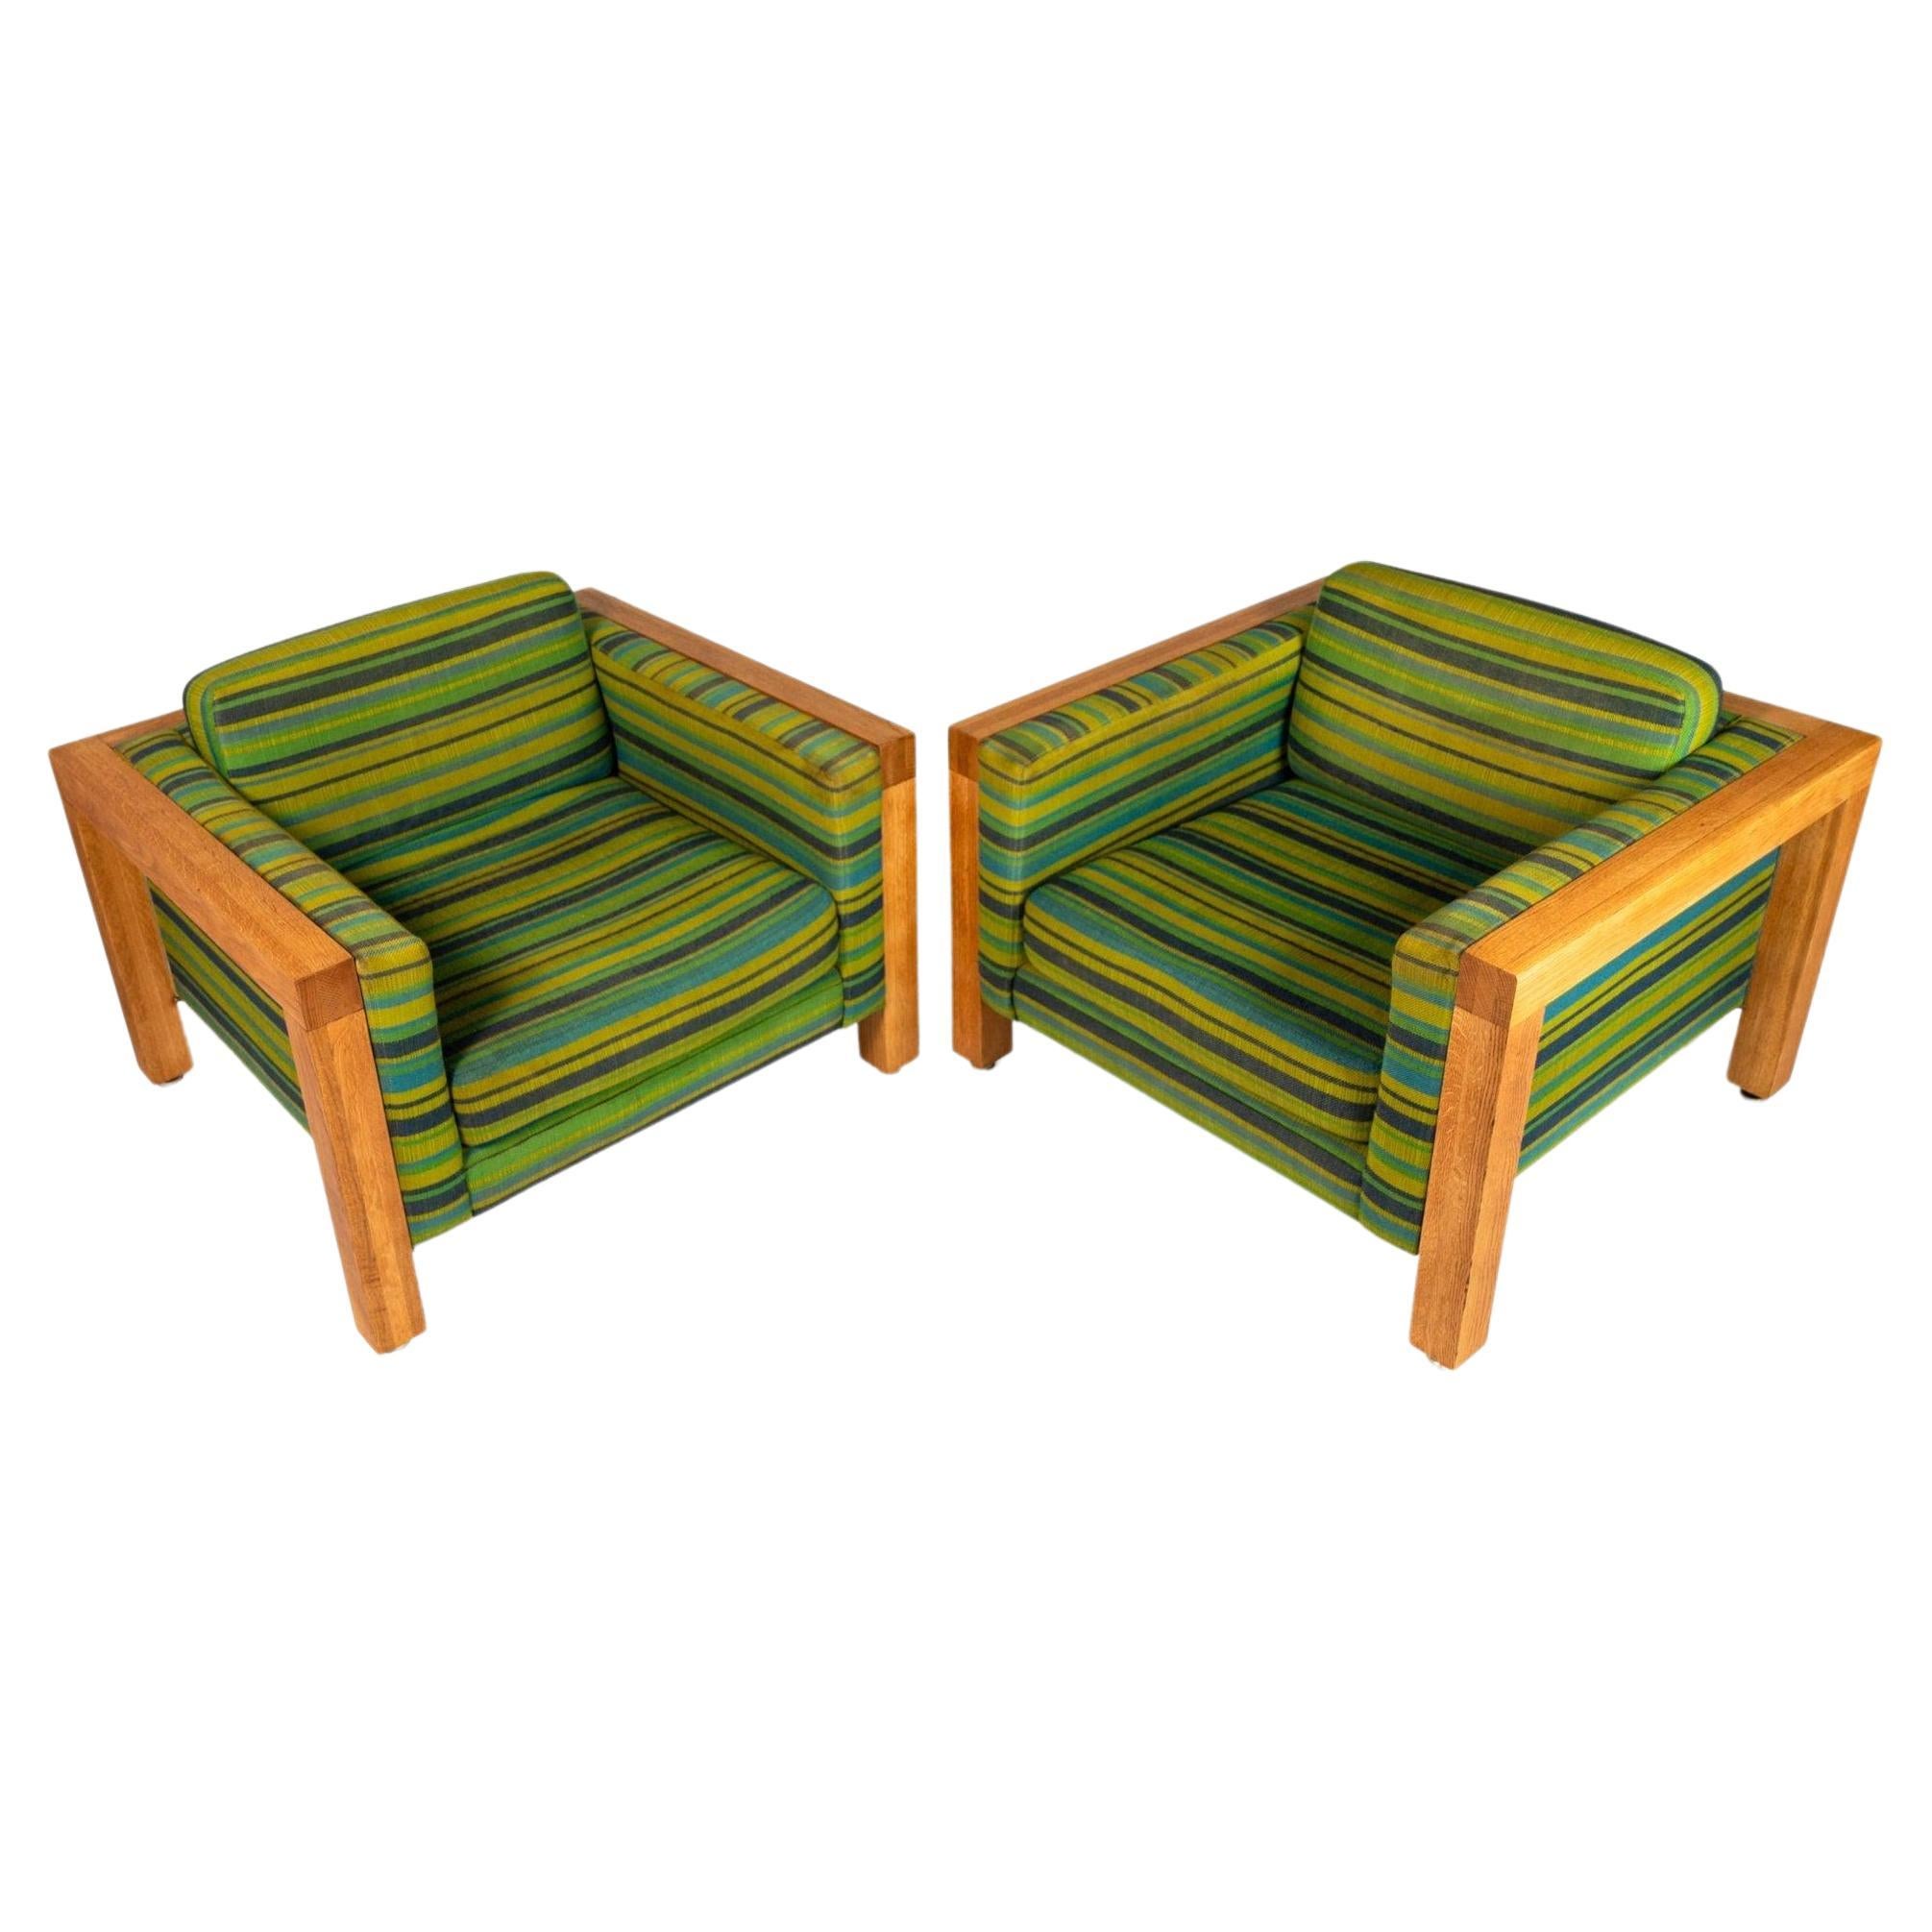 Set of 2 Cube Chairs / Club Chairs After George Nelson for Herman Miller, 1970s For Sale